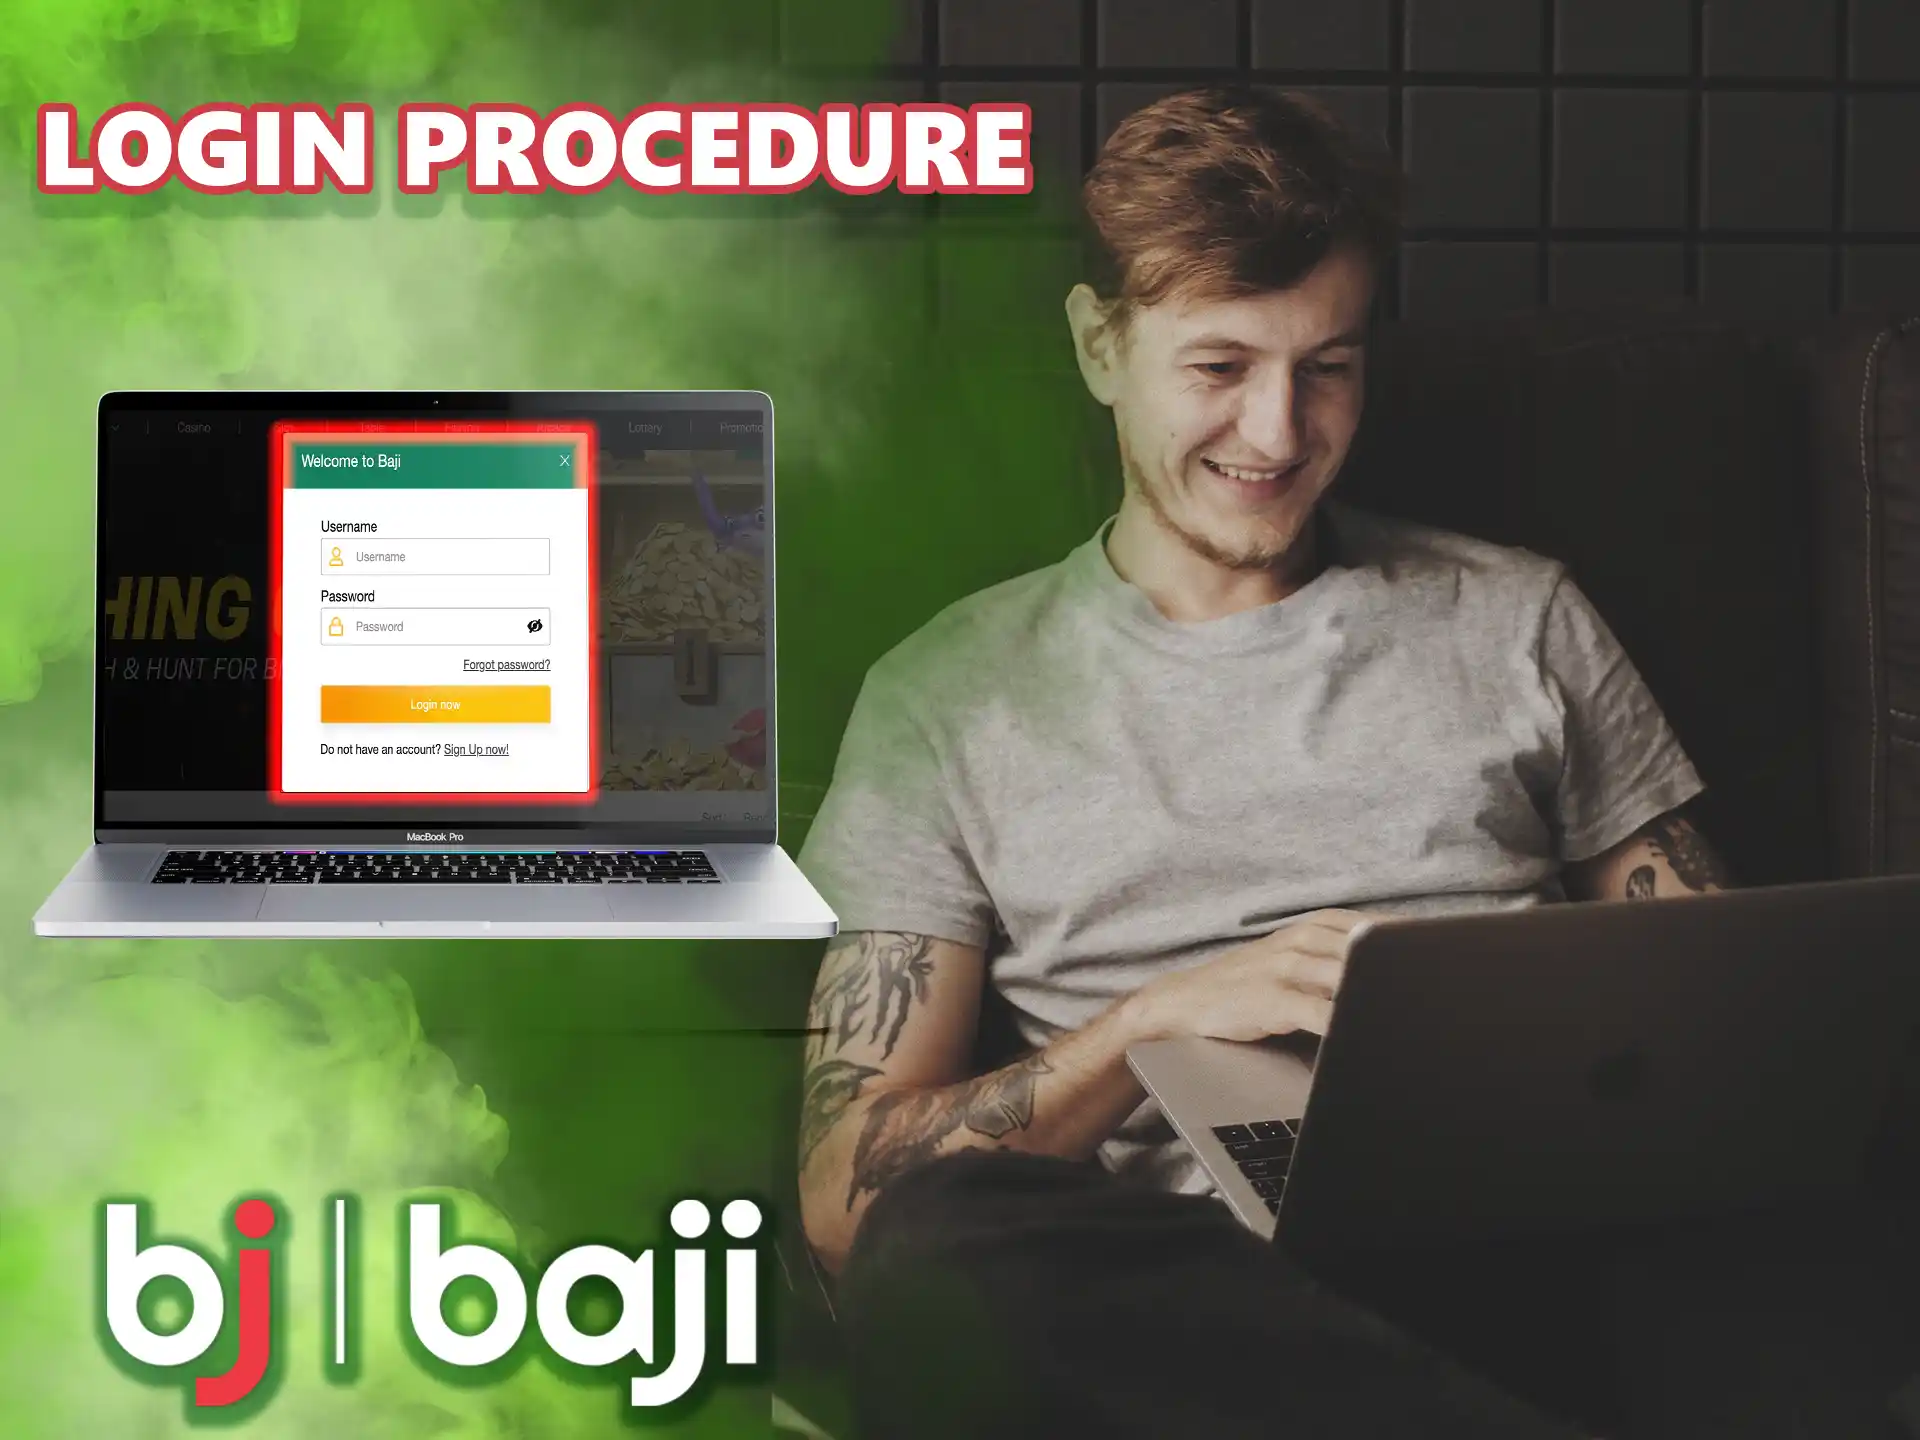 In order to bet effectively, you need to be authorized in Baji we have described this process in detail.